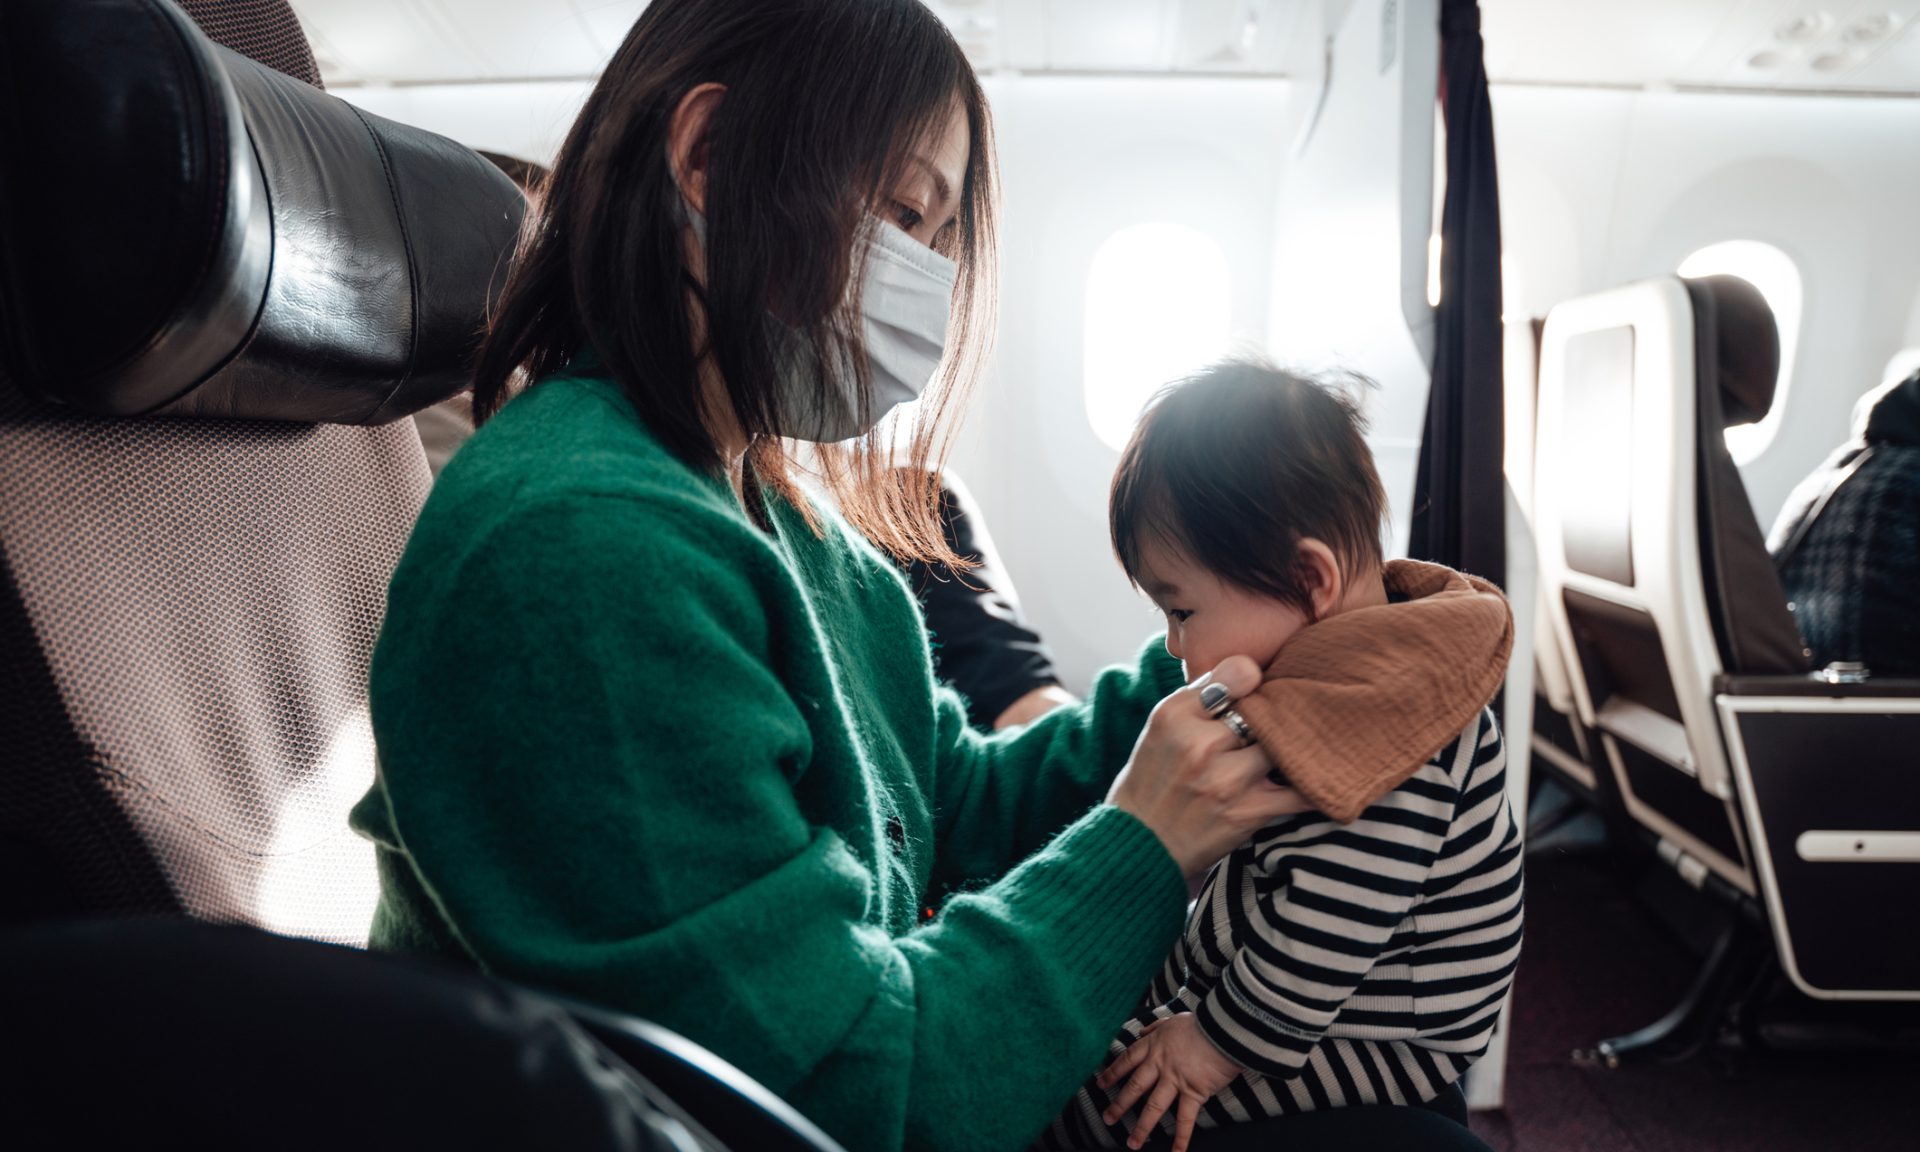 In-flight Entertainment: Our Two New Favorite Toys for Keeping